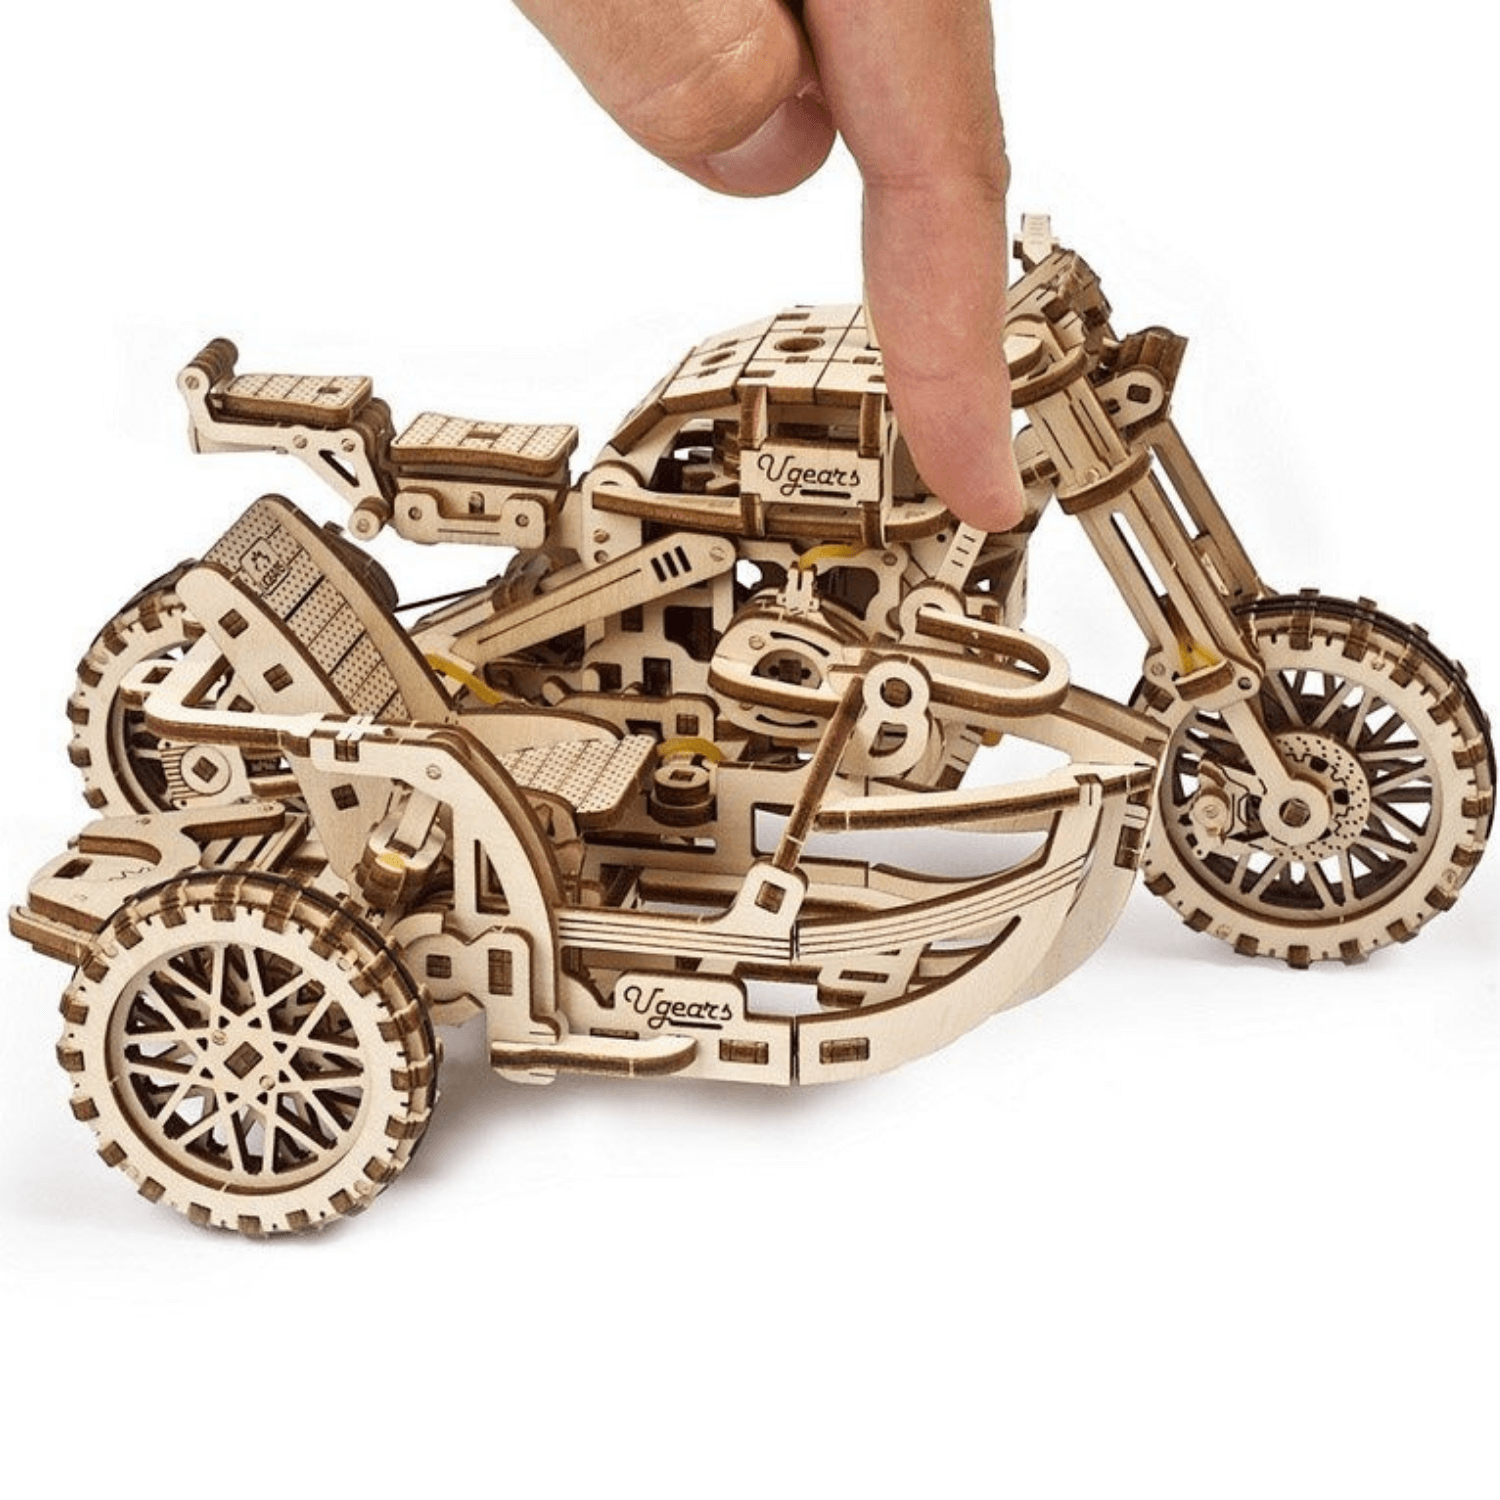 moto Jigsaw Puzzle for Sale by LeaRauter